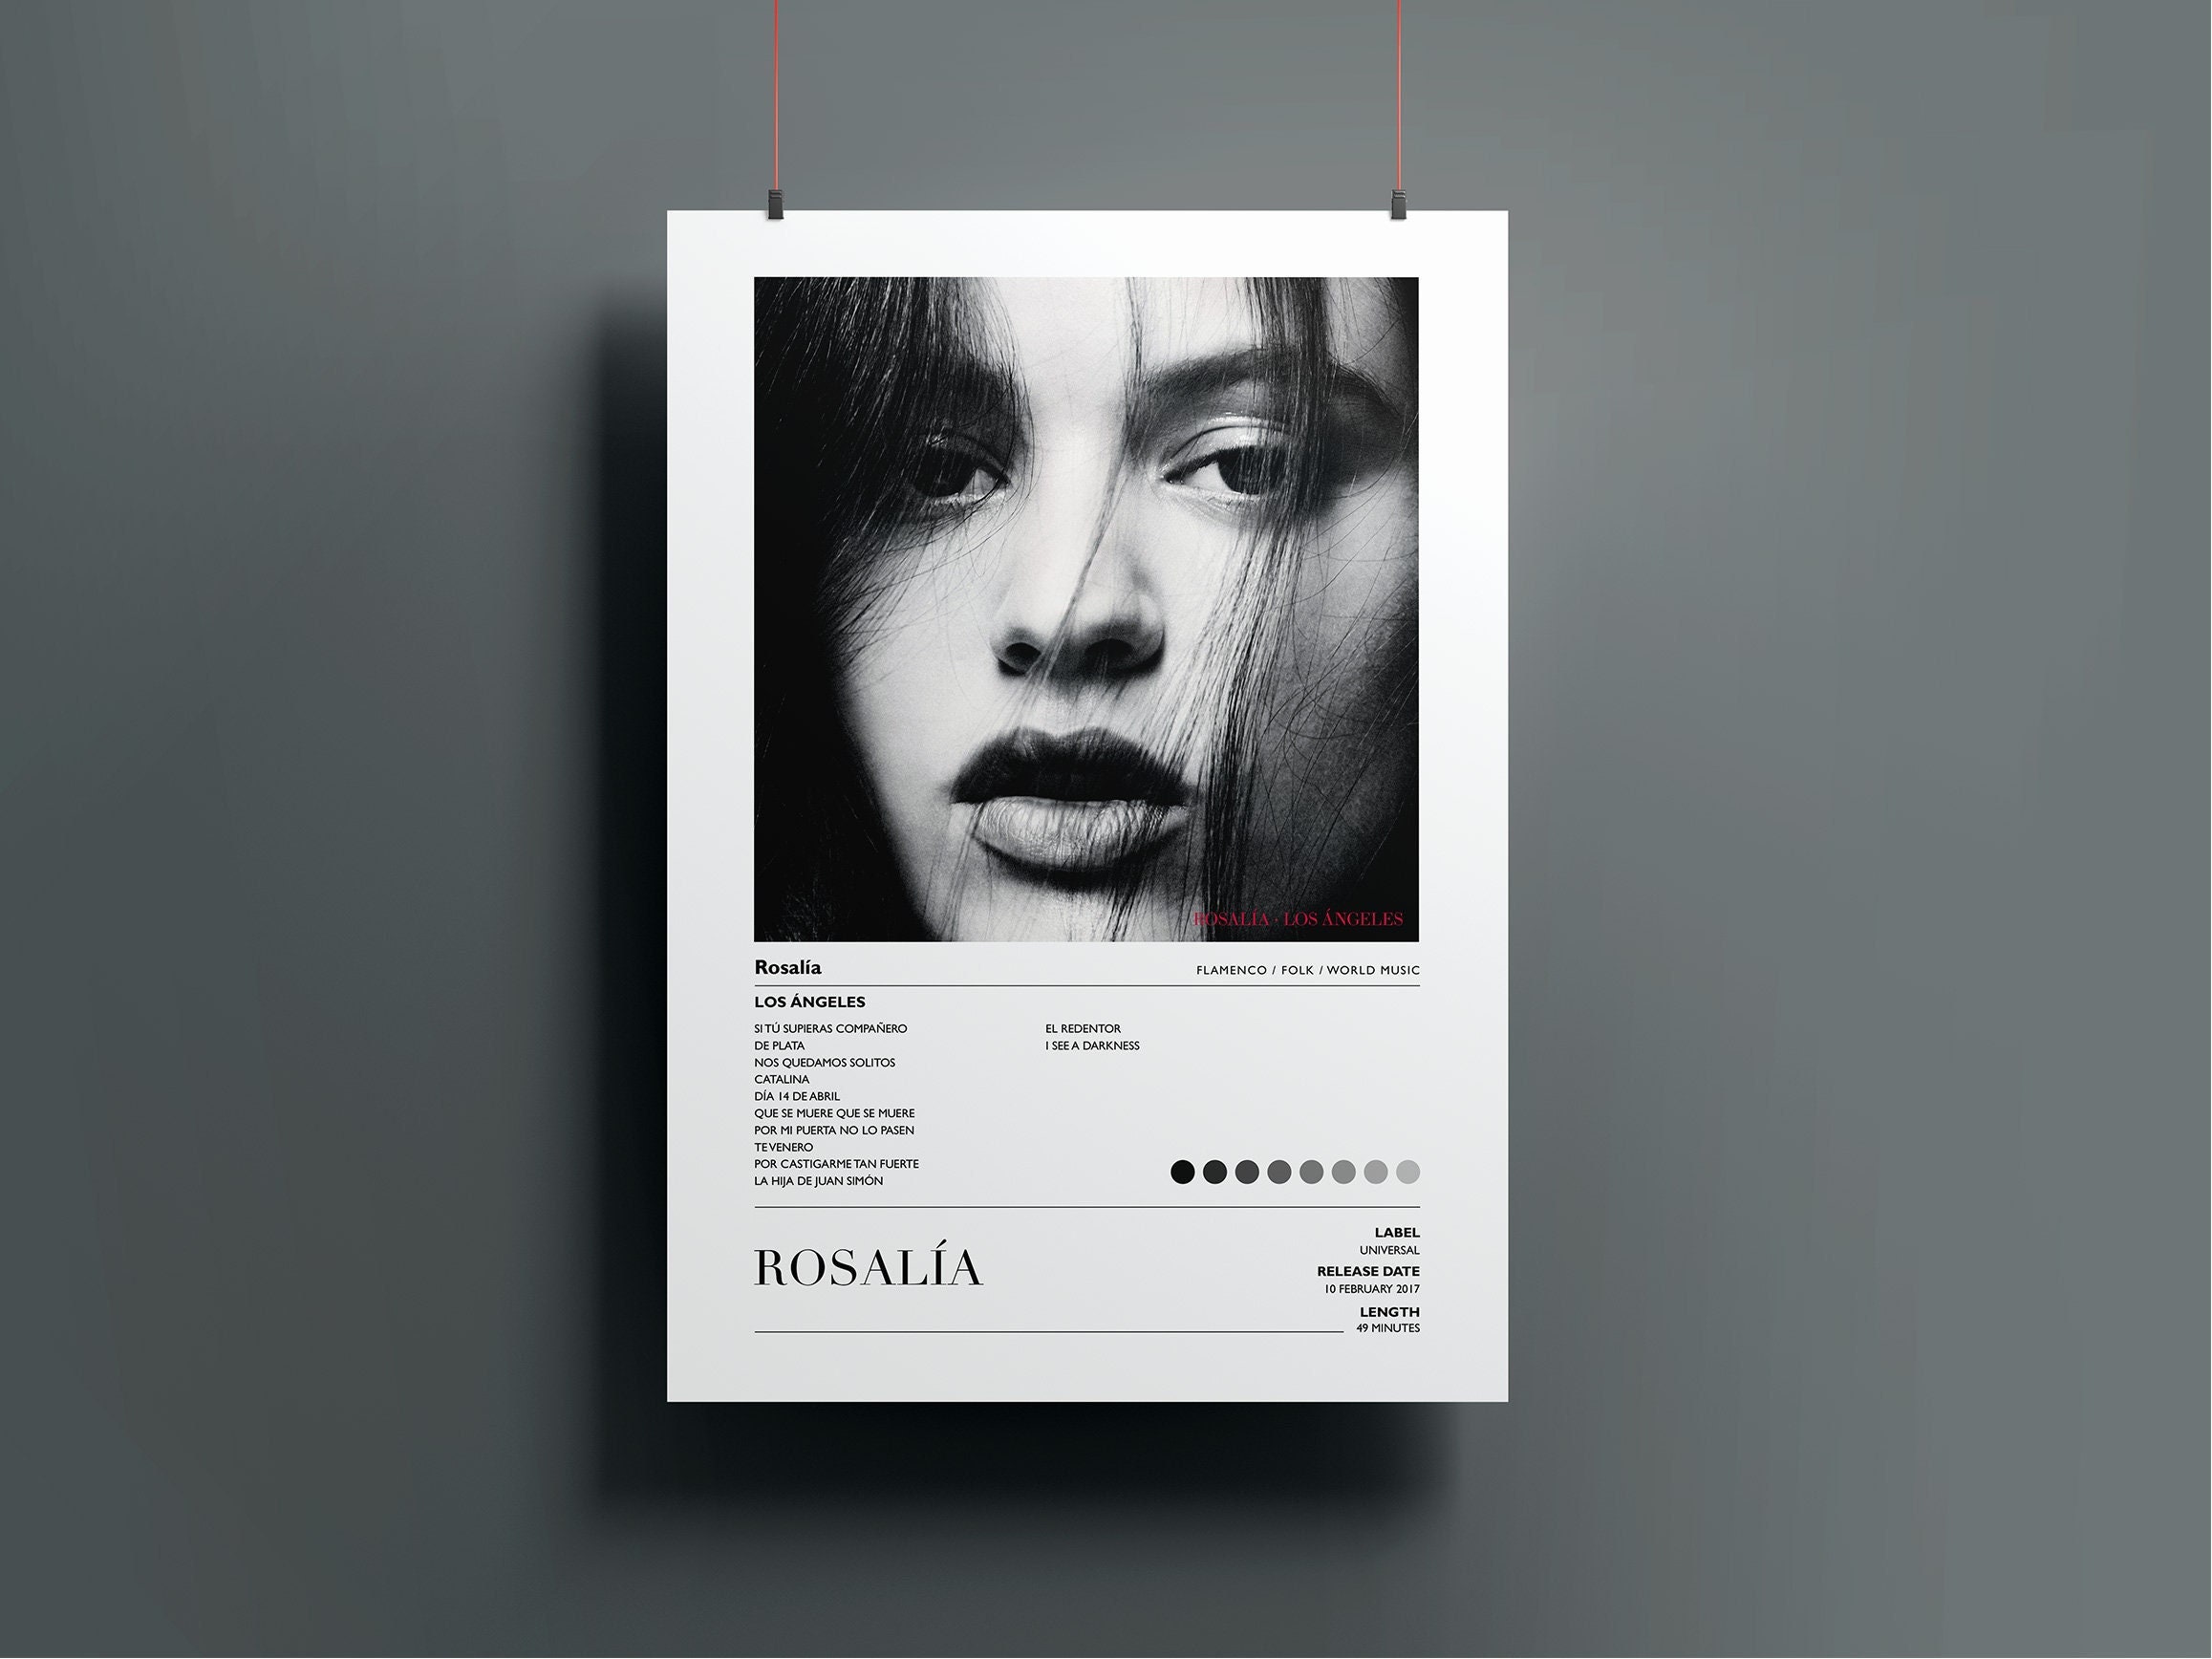  DAXXIN Rosalía Motomami Poster 031 Canvas Poster Wall